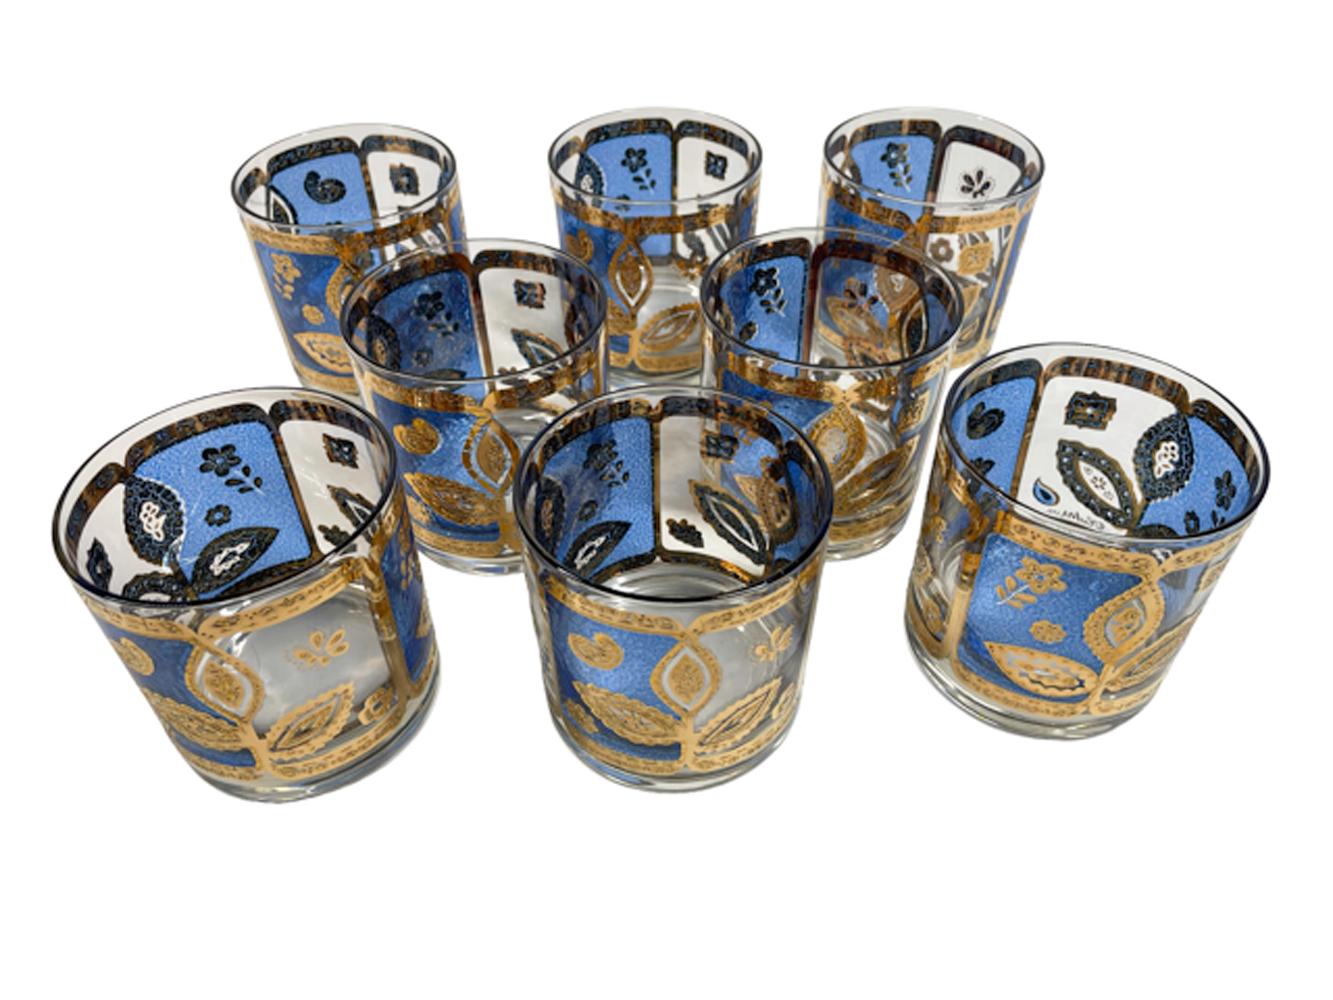 Set of eight hard to find Culver rocks glasses in translucent blue enamel with raised, textured 22 karat gold. Each with three panels framed in gold and split into blue and clear halves centering a trio of leaves. Signed Culver LTD and with a wood